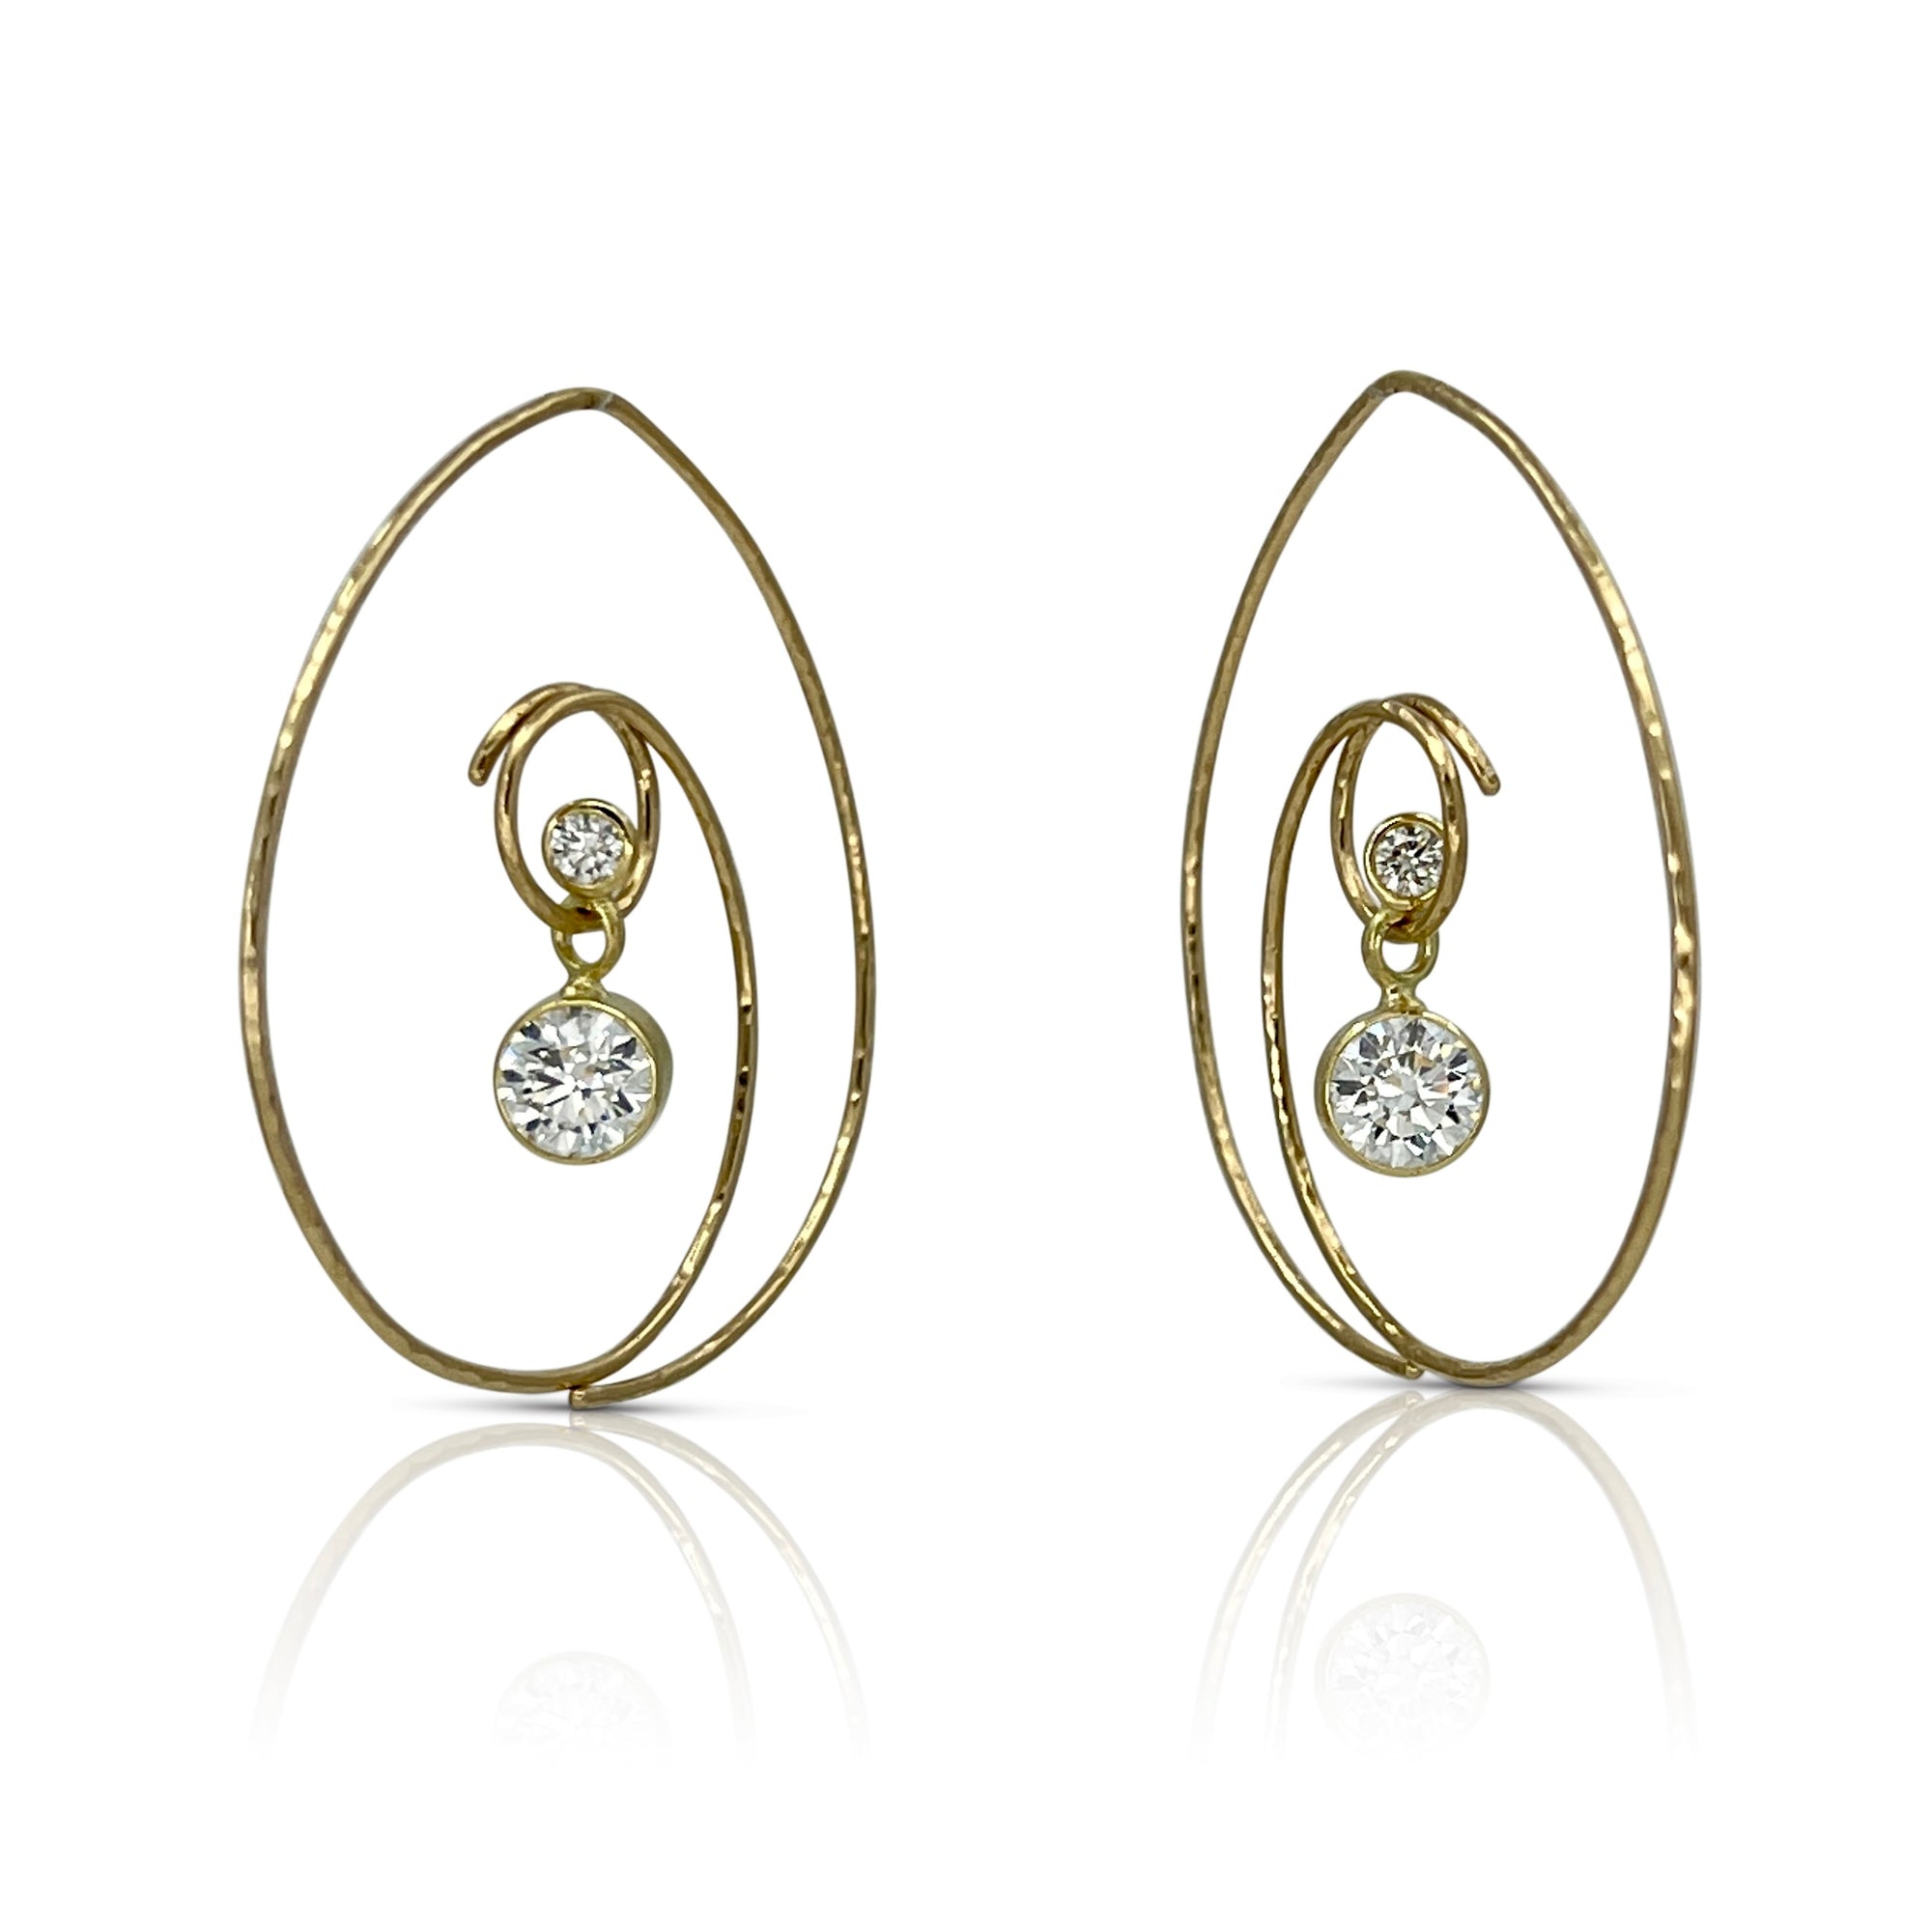 Spiral earrings in 18K yellow gold with a duo of dangling natural and lab grown diamonds shown on model made by Ayesha Mayadas